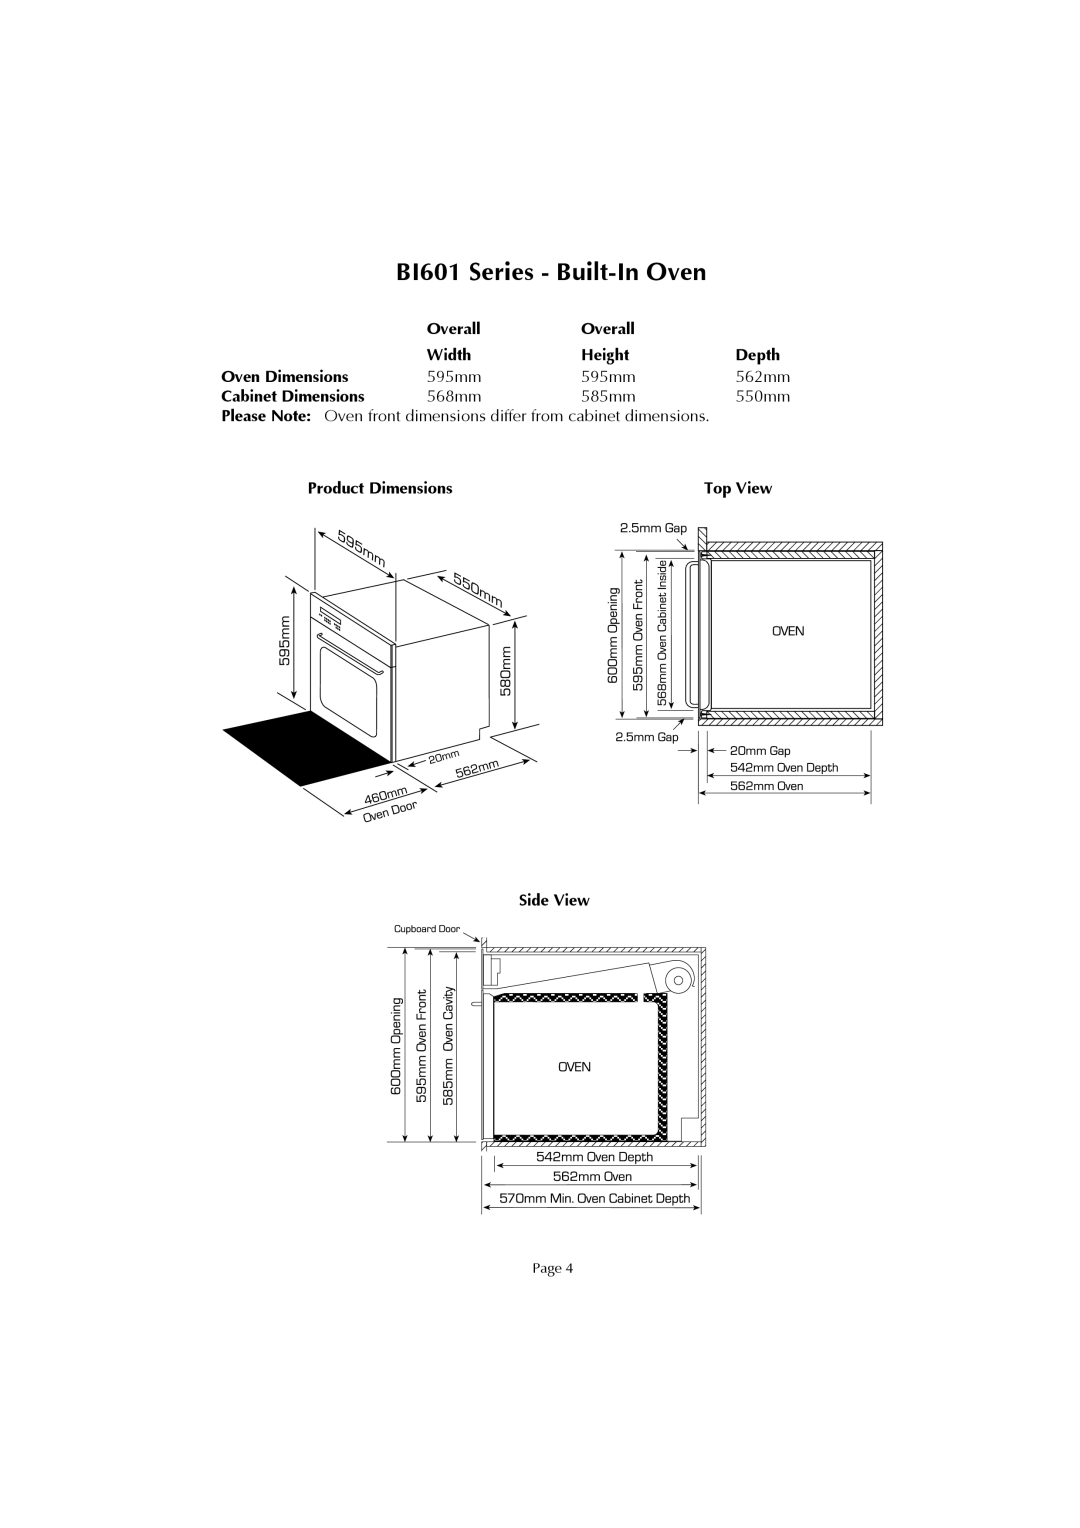 Fisher & Paykel installation instructions BI601 Series - Built-InOven, Overall 